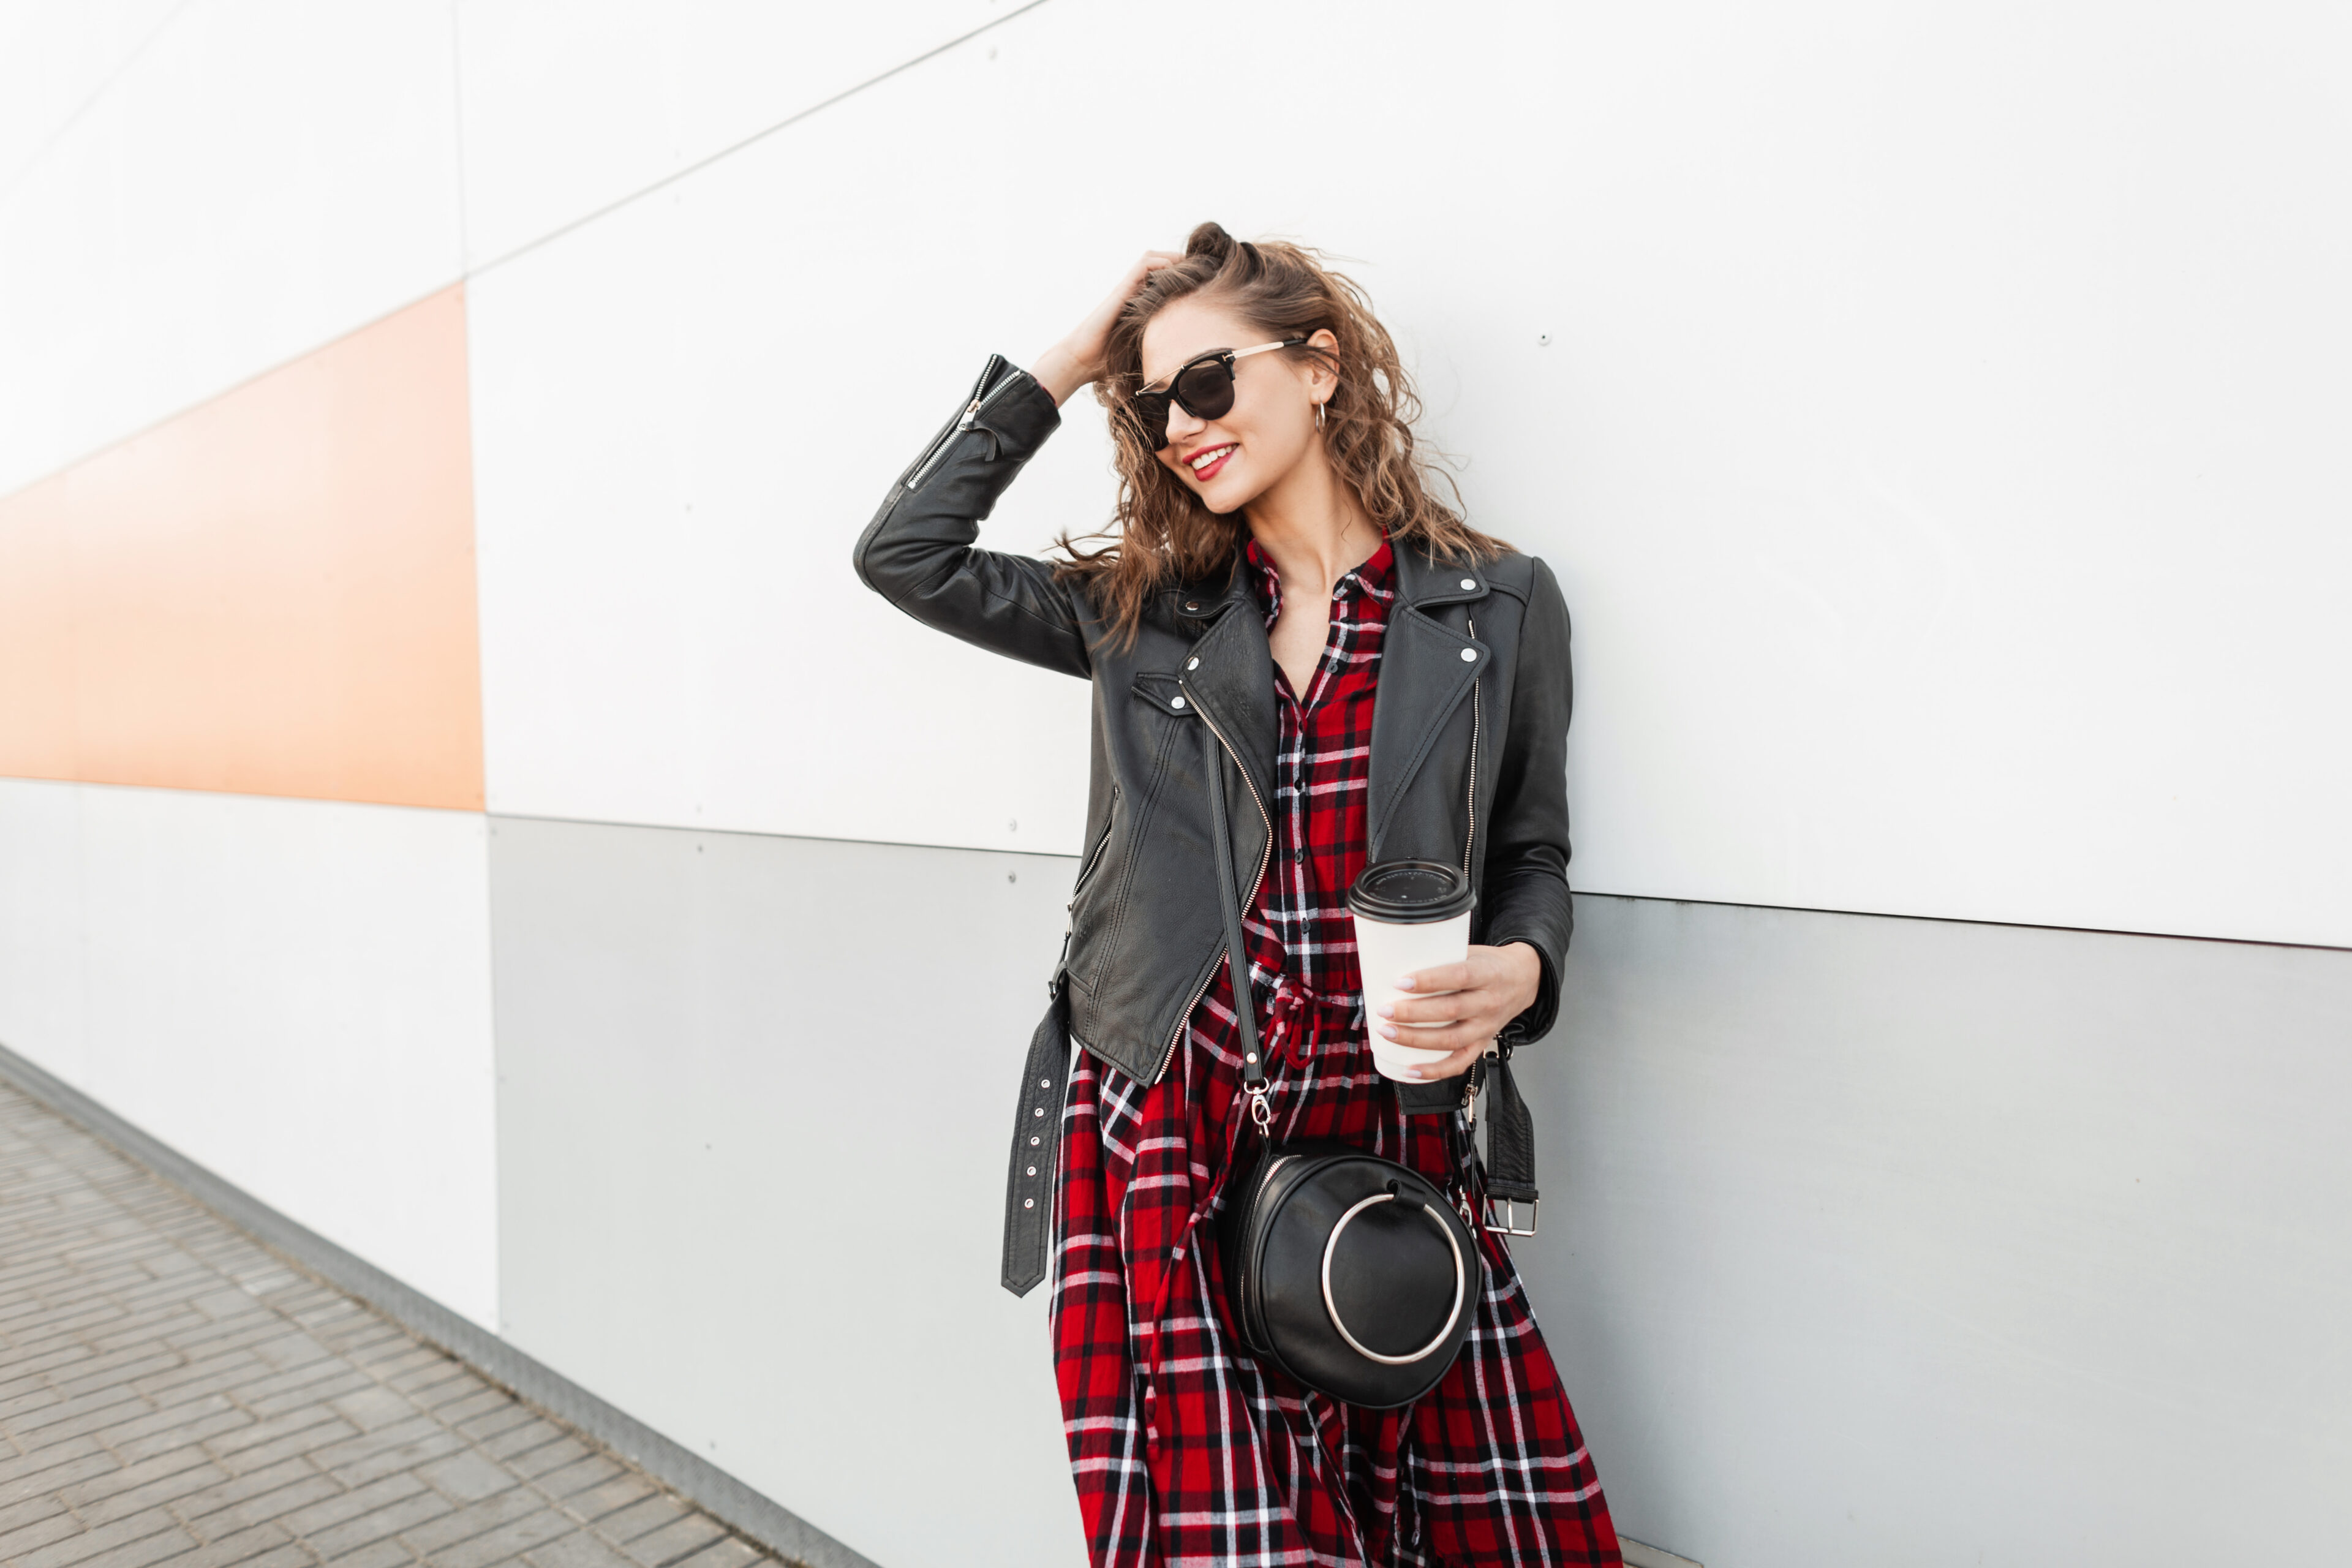 Checkered Skirts And Leather Jackets